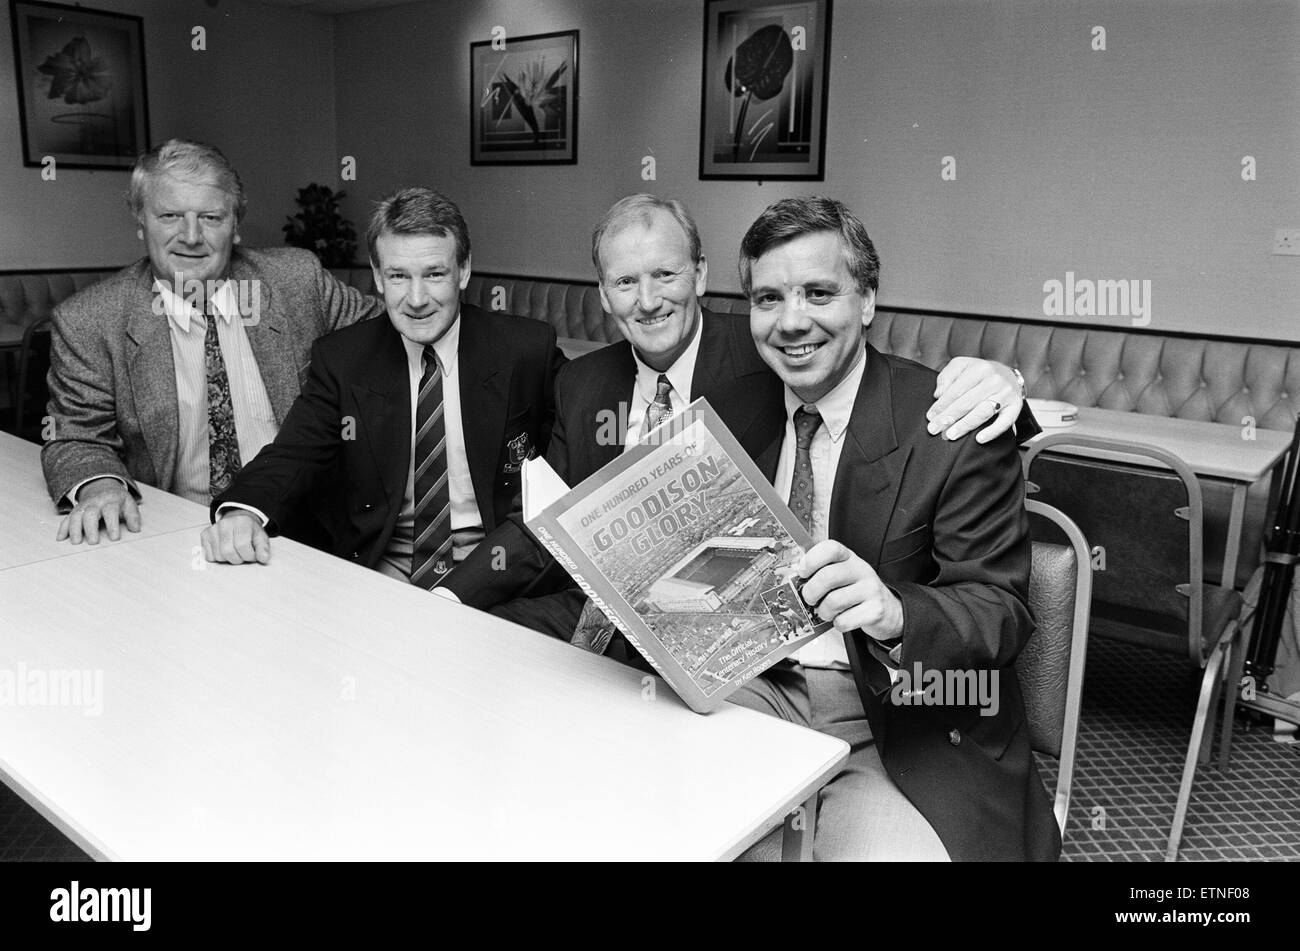 Ken Rogers, Book launch, One Hundred Years of Goodison Glory, The Official Centenary History, Photo-call at Goodison Park, home of Everton Football Club, 24th August 1992. Stock Photo